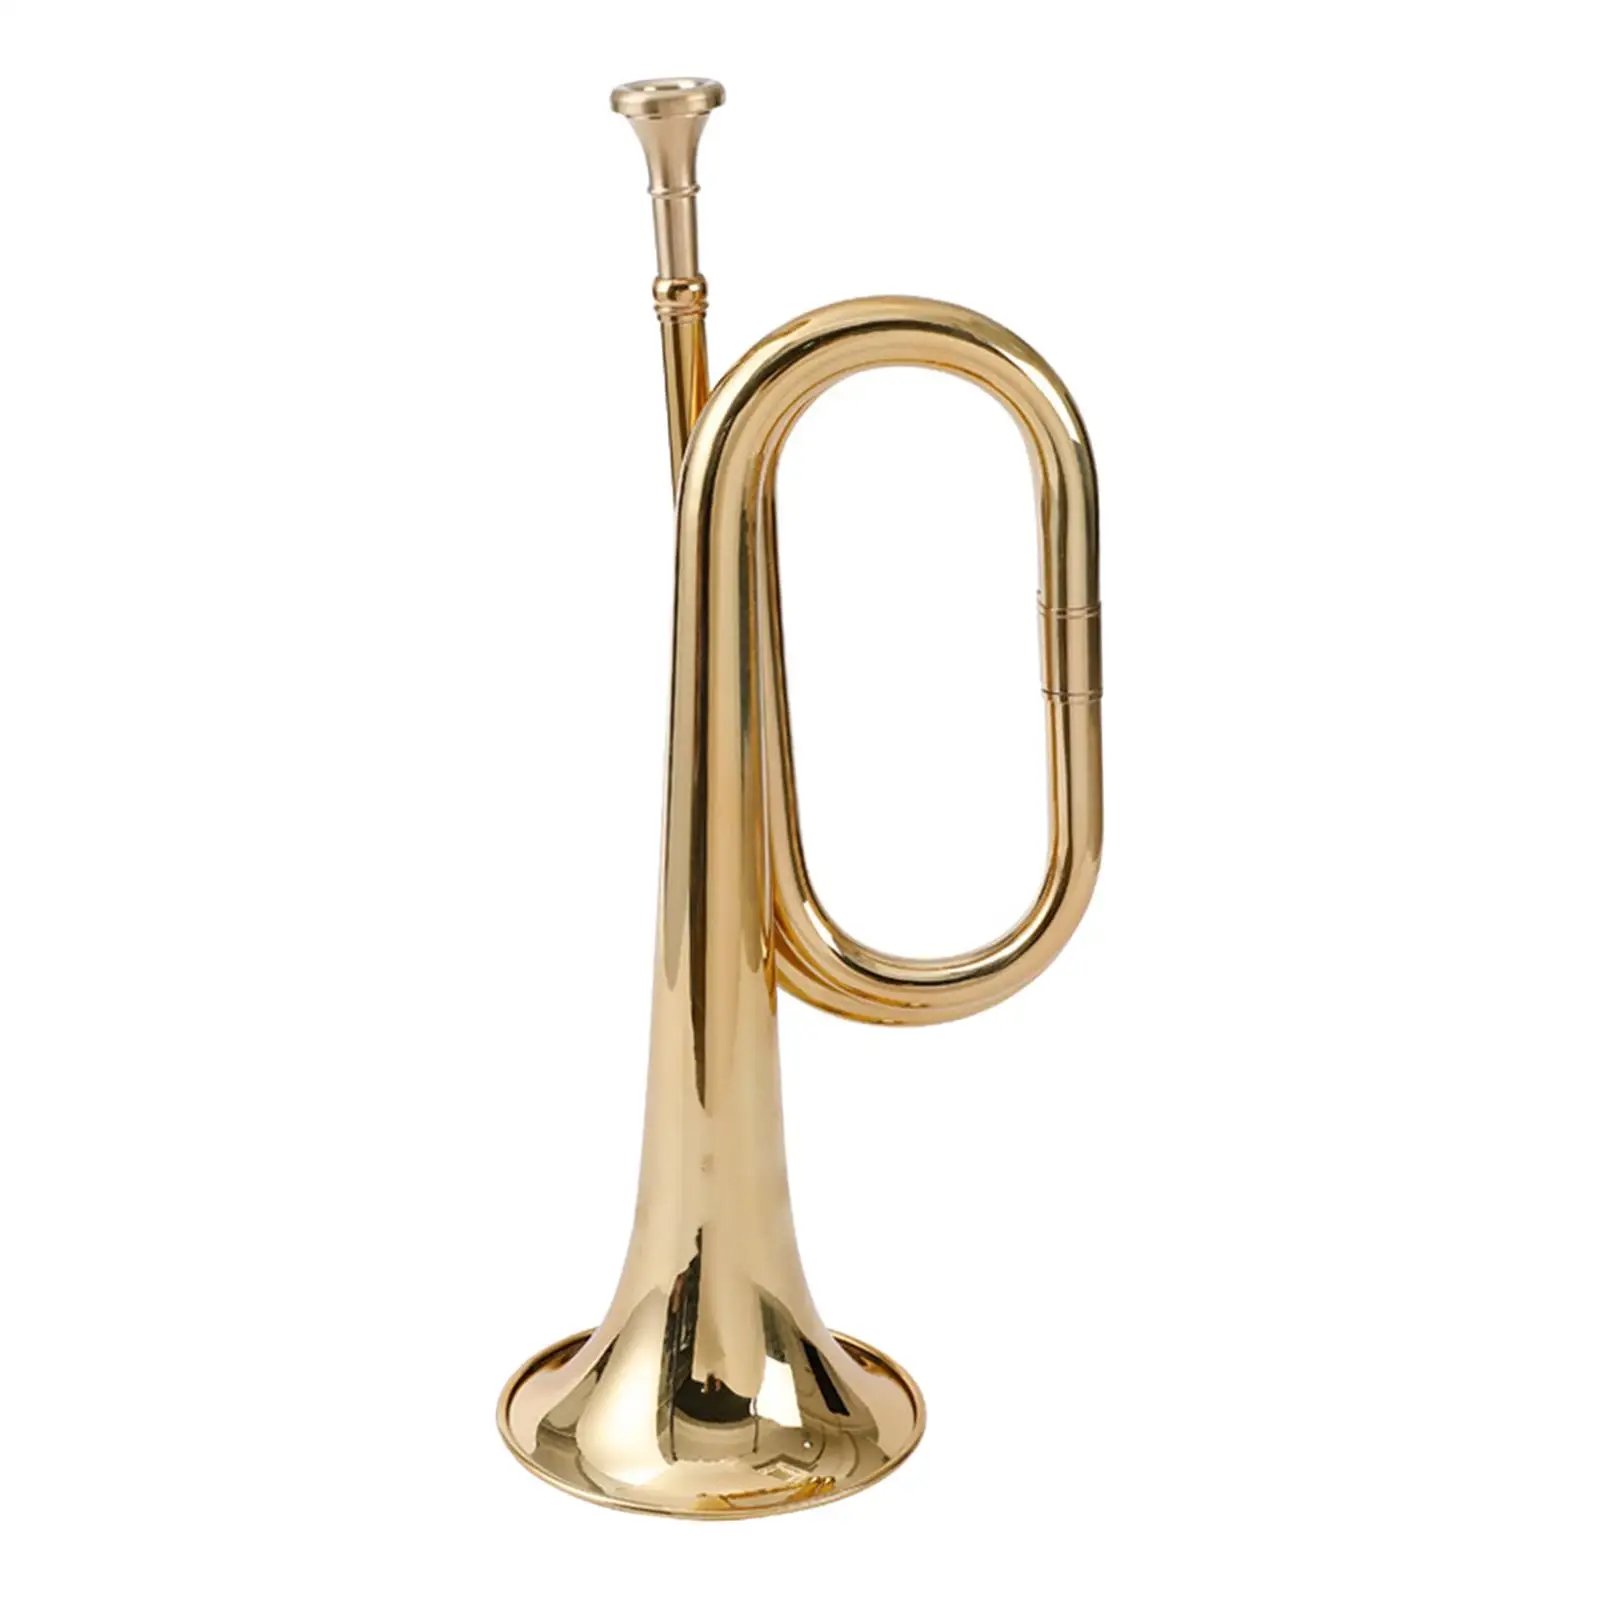 

BB Bugle Musical Instrument Orchestra Music Brass Cavalry Blowing Trumpet for Beginners Orchestra Professional Children Band